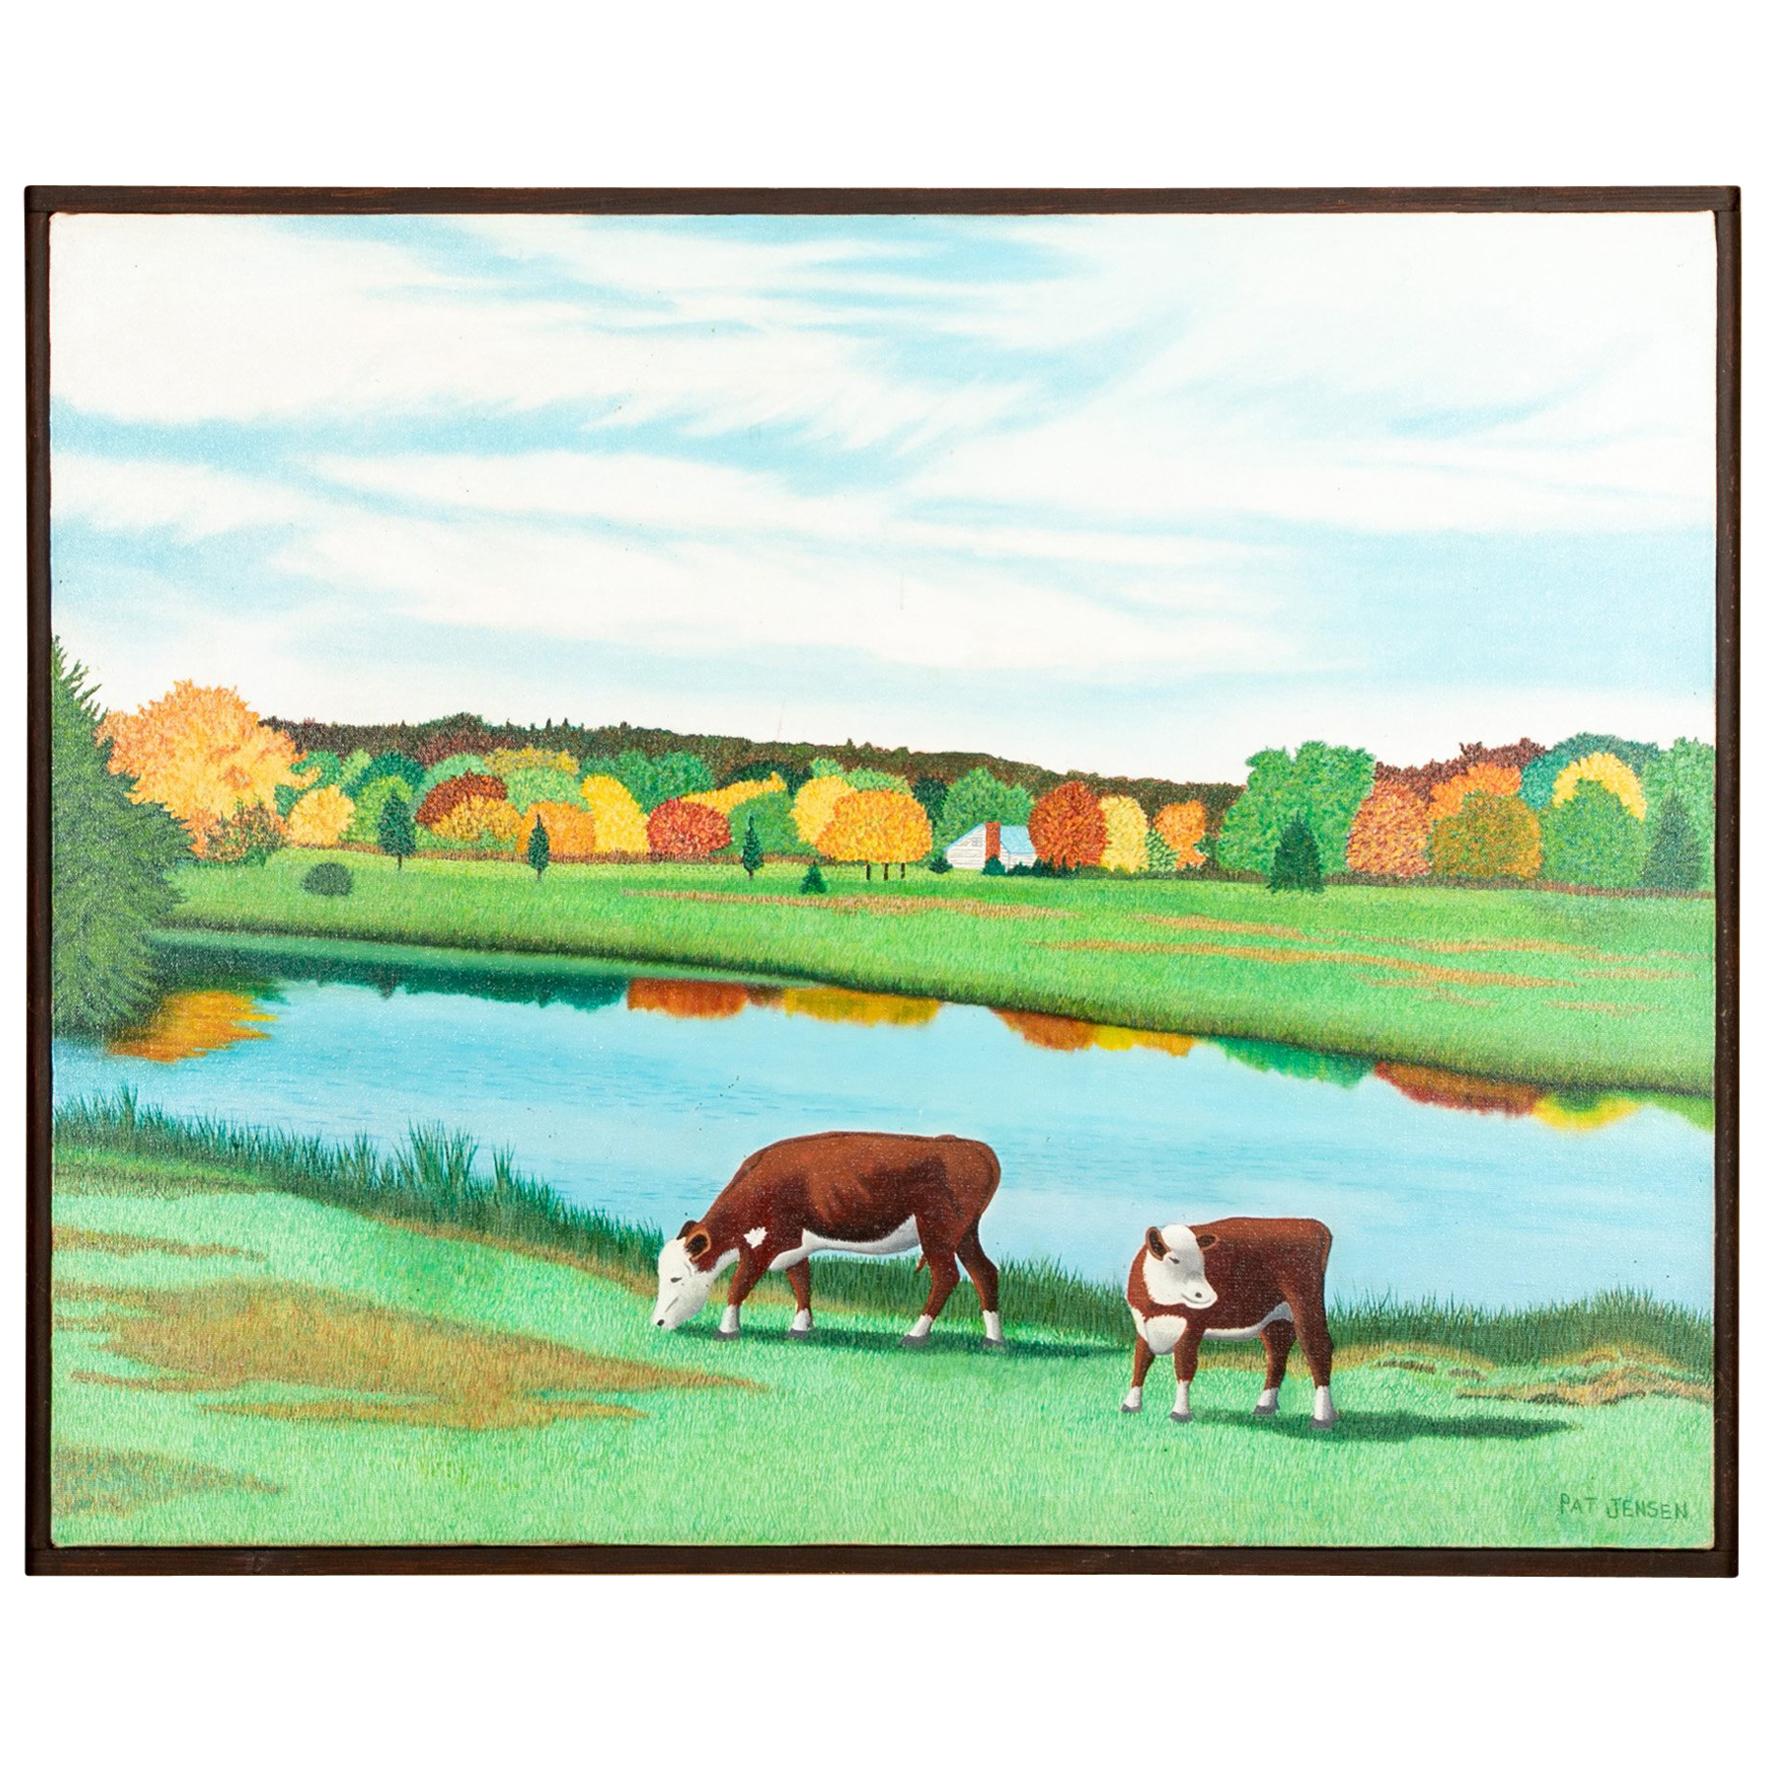 Pat Jensen Oil On Canvas, "Pond With Two Cows"